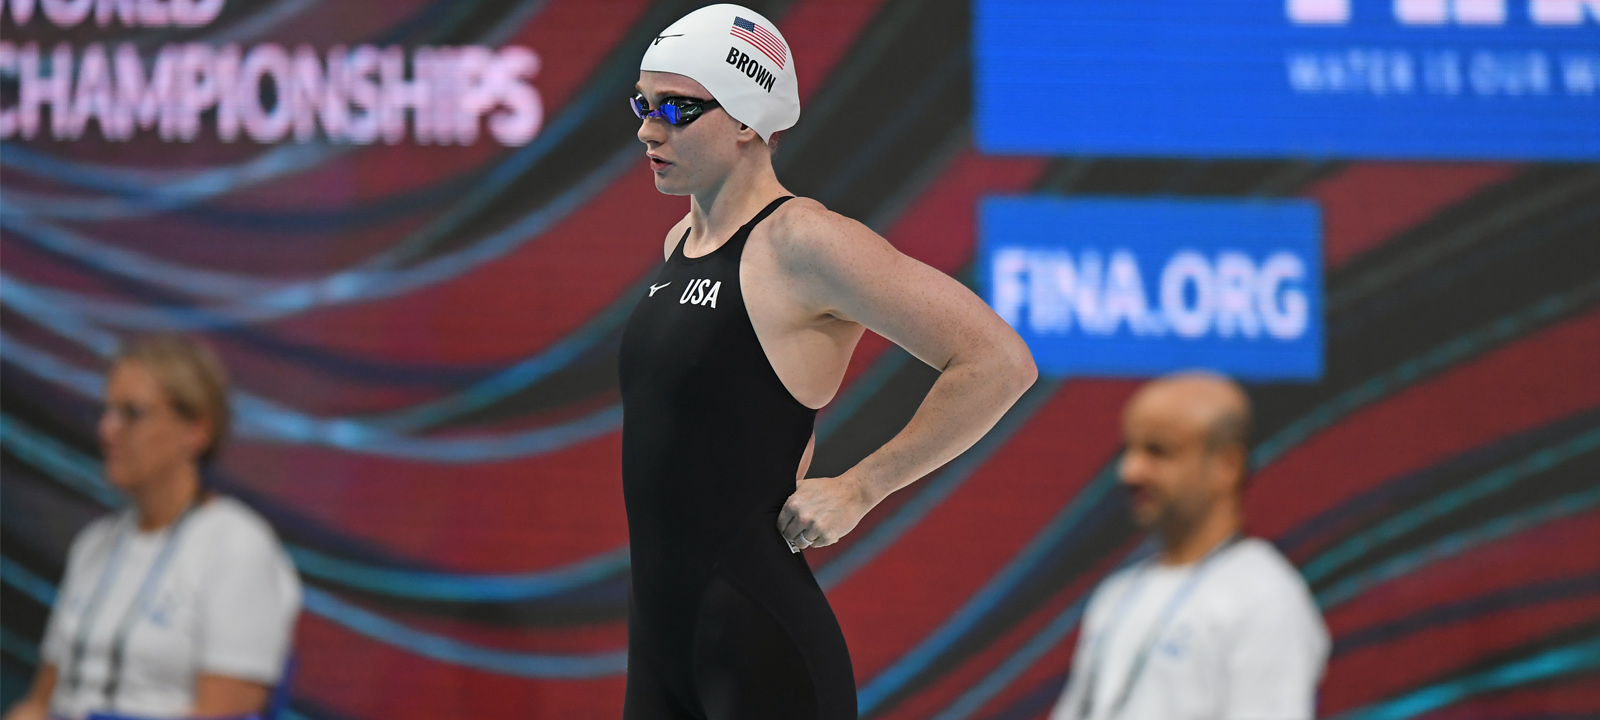 Women’s Medley Relay Prelims Lineups: U.S. Opts For White-Walsh-Hinds-Brown Team